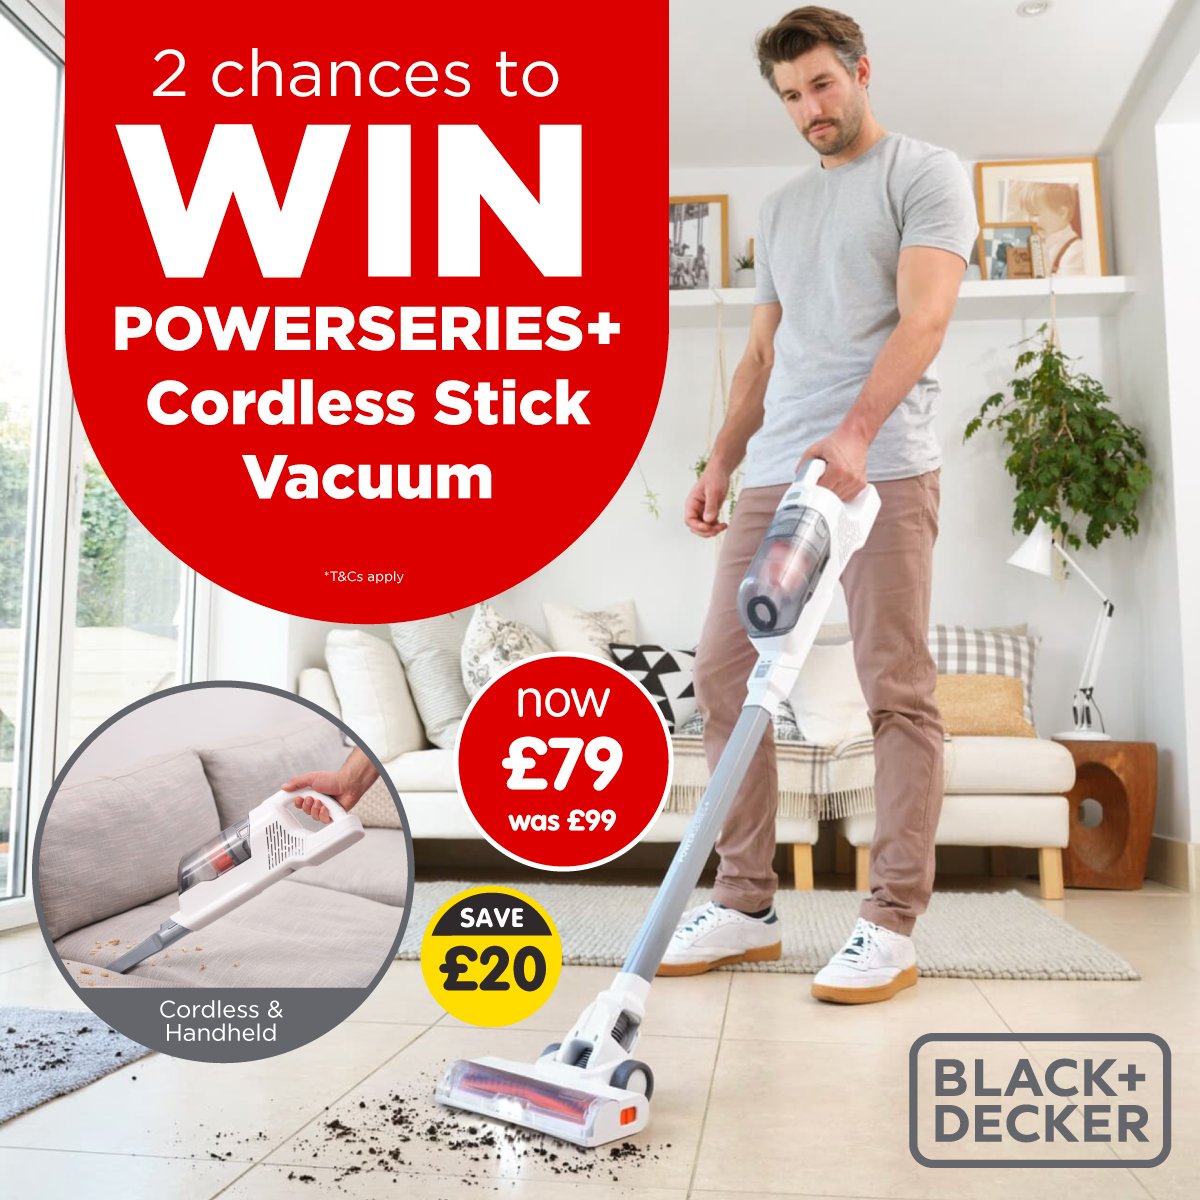 ✨#COMPETITION TIME ✨ We're giving away TWO chances to #WIN a POWERSERIES+ Cordless Stick Vacuum, courtesy of Black & Decker! For a chance to WIN, simply; 1) FOLLOW US 2) RT 3) COMMENT #BMPowerseries Competition ends 9am 30/5/24